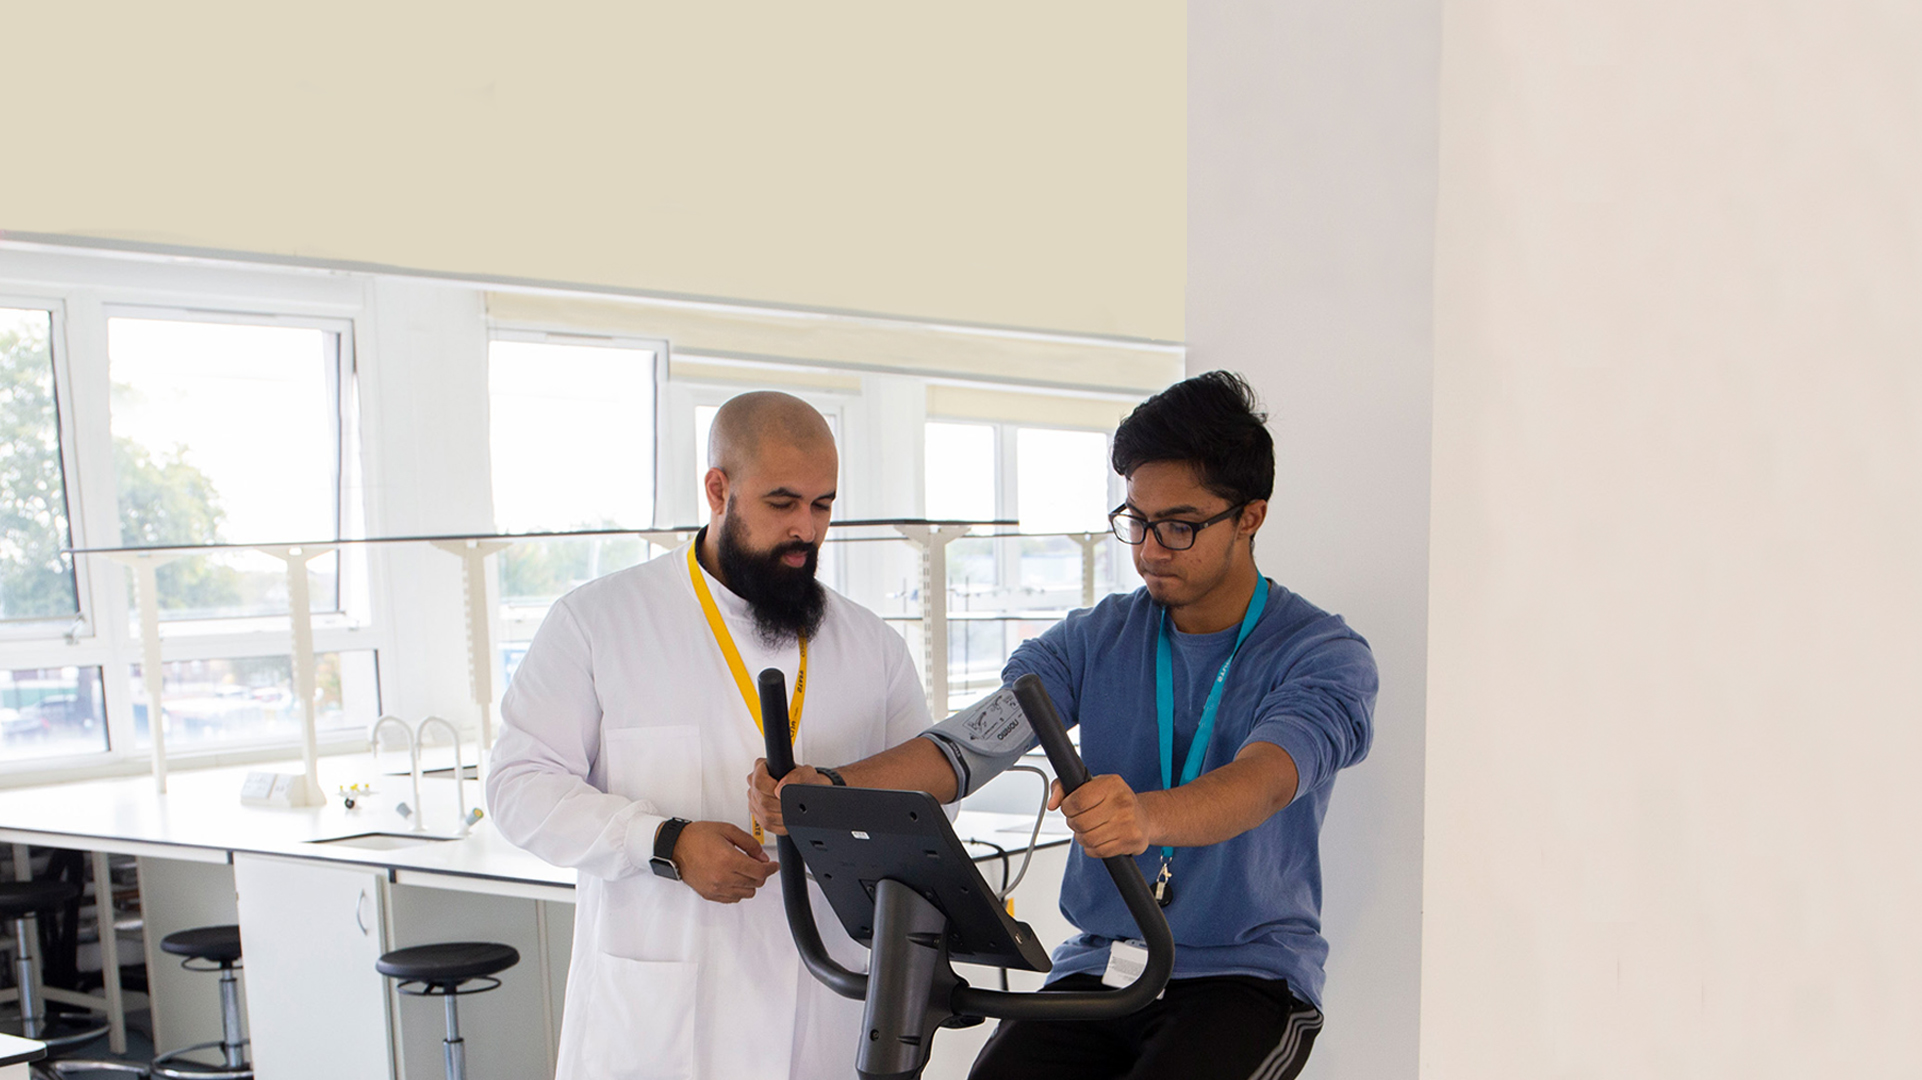 A Public Health student using an exercise bike for testing, with a tutor stood next to him.